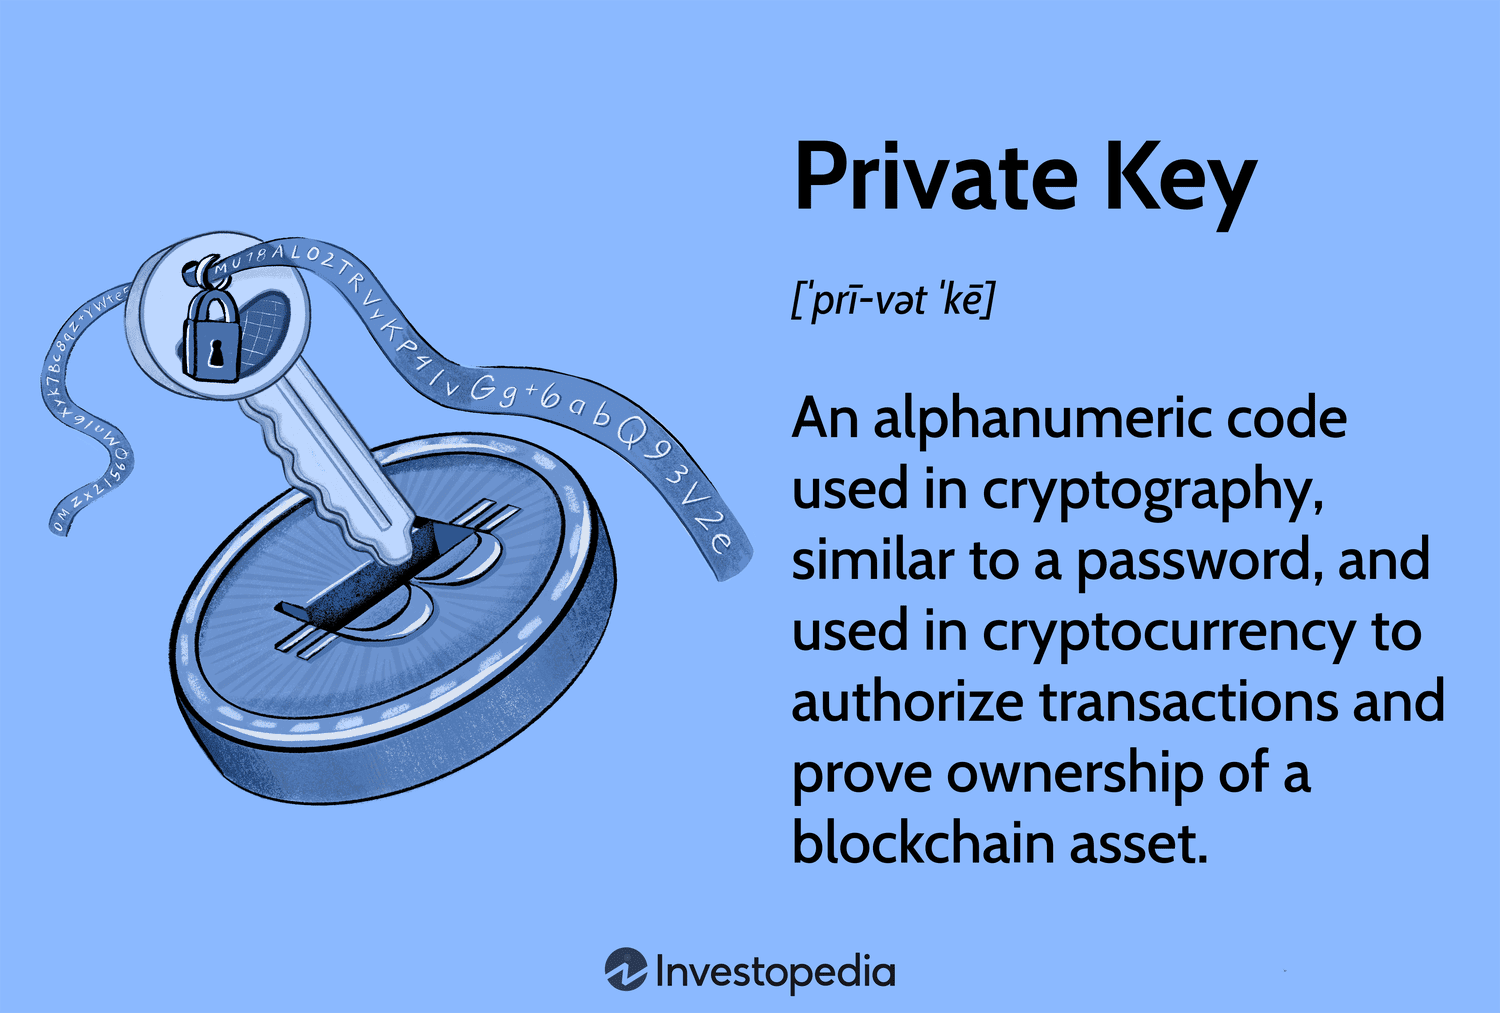 All Bitcoin private keys are on this website | Hacker News